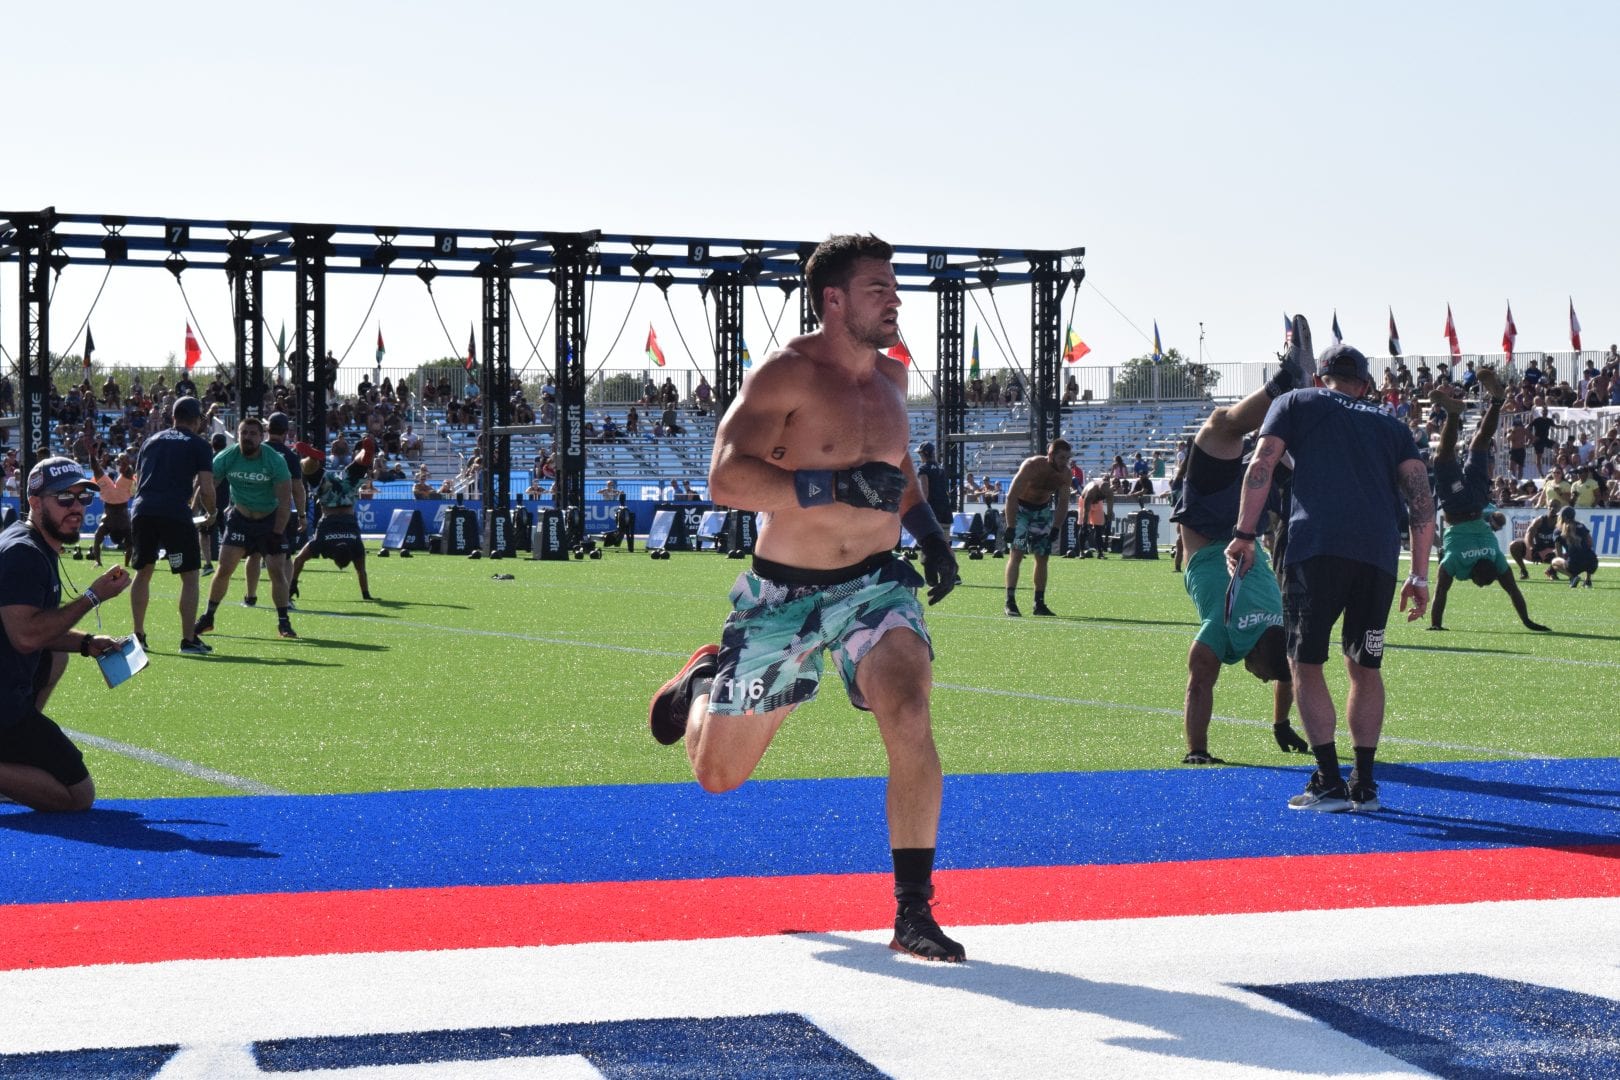 Alex Vigneault crosses the finish line in the second event of the 2019 CrossFit Games